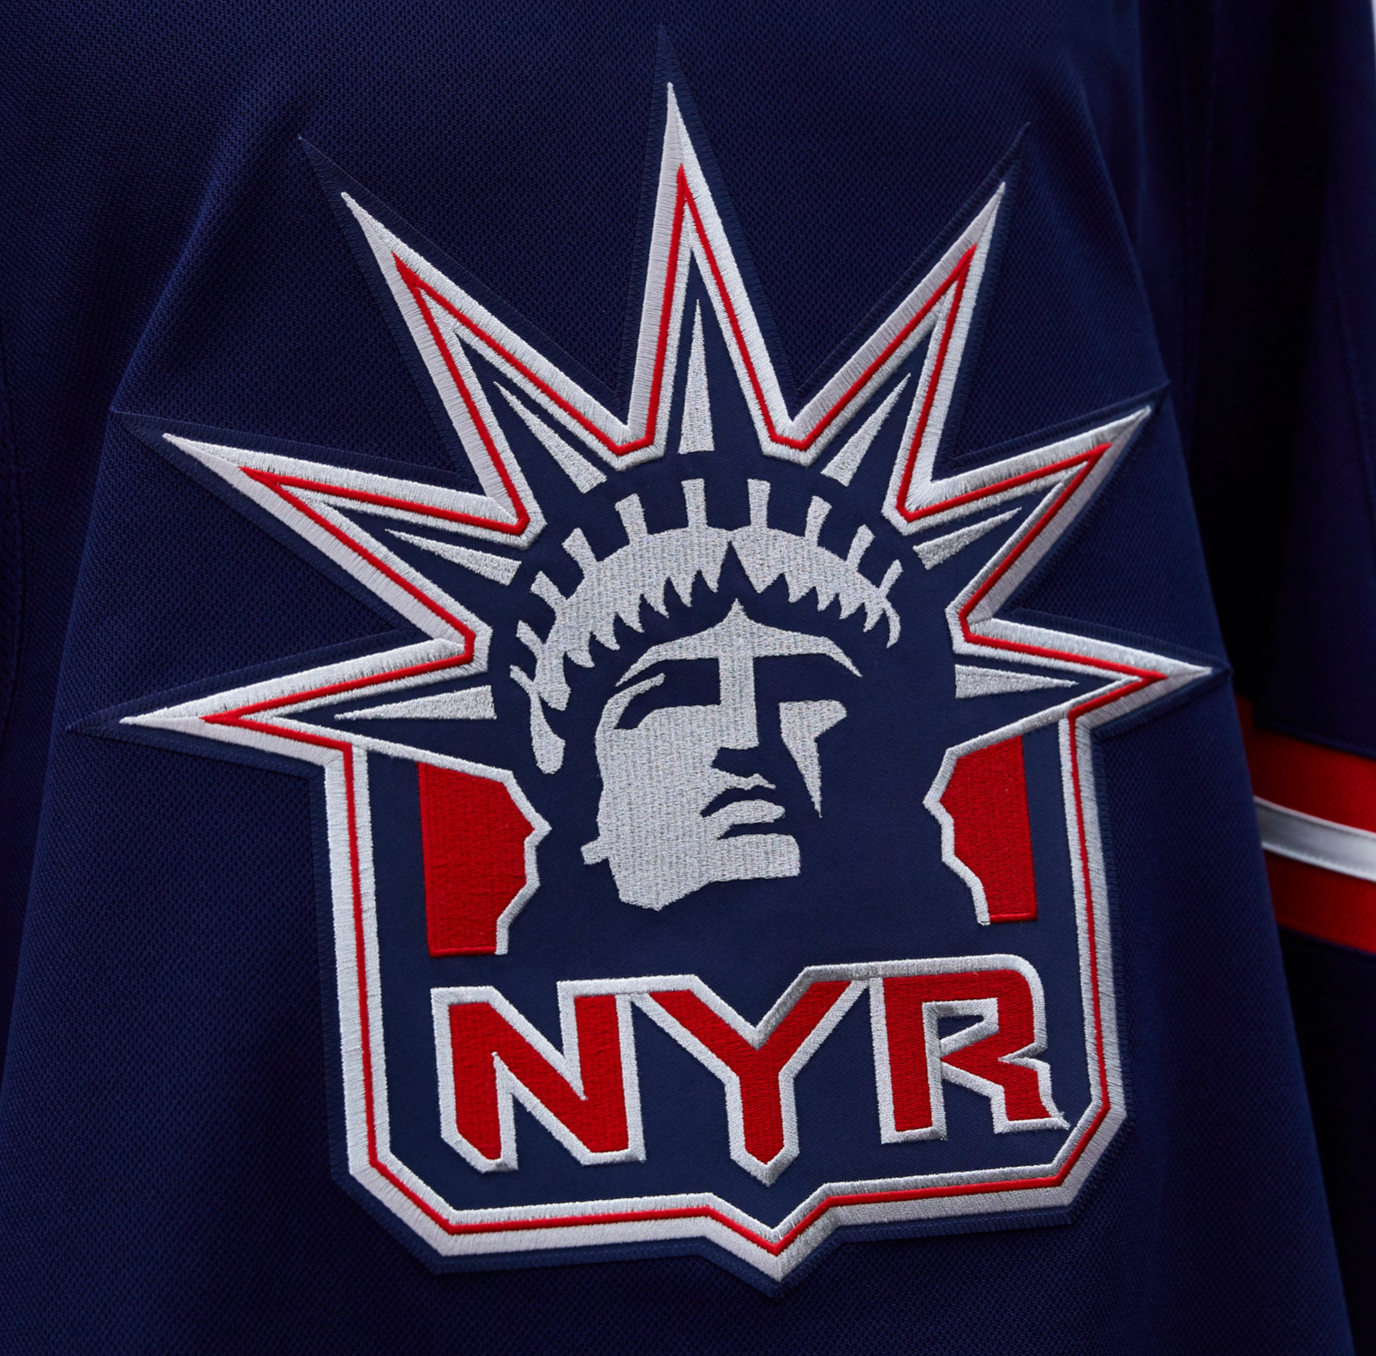 Could we see advertisements on New York Ranger jerseys?